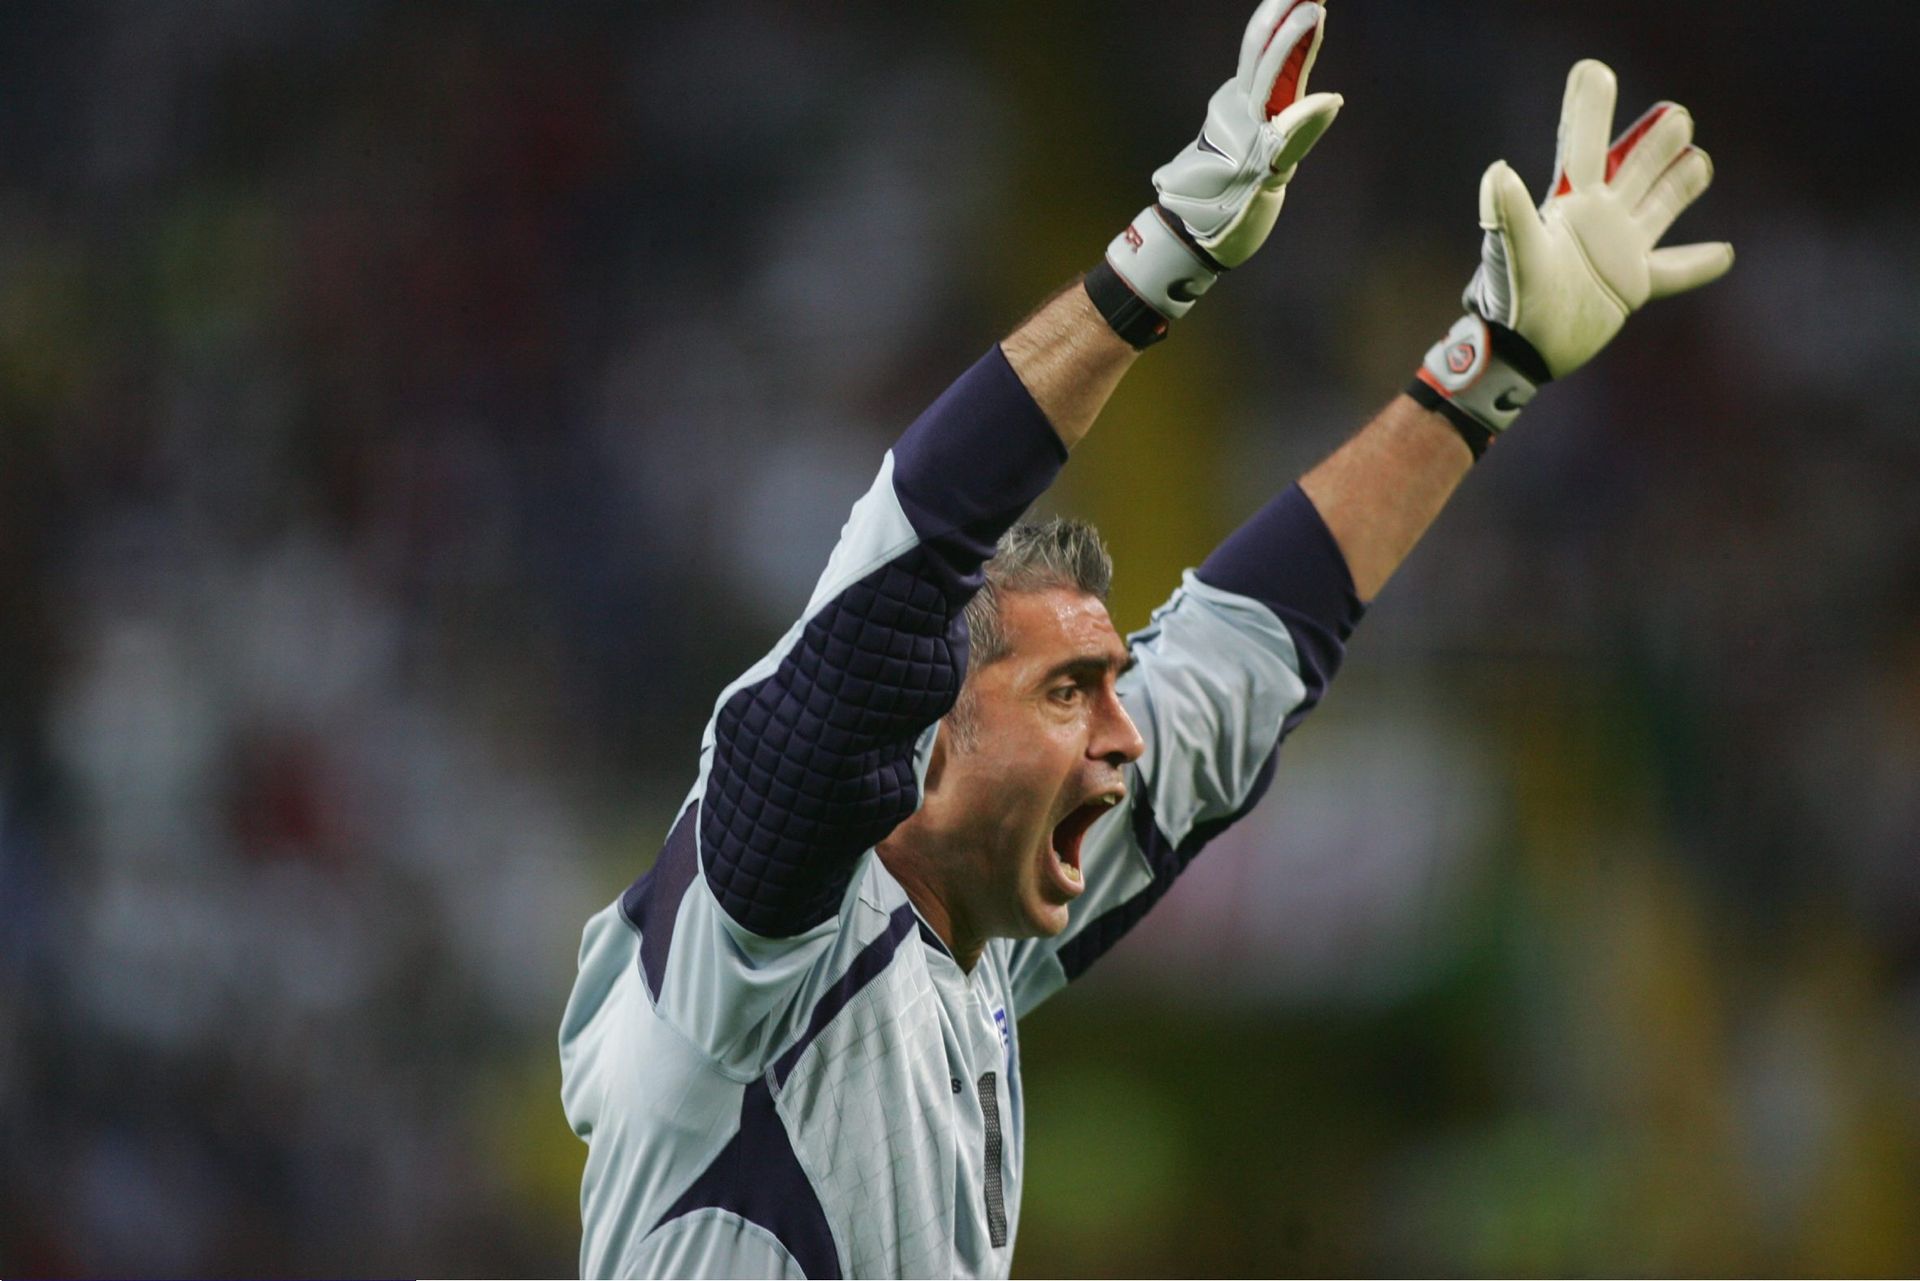 <p>                     Antonios Nikopolidis won 90 caps for Greece between 1999 and 2008 and was in goal for his nation's historic European Championship win in 2004.                   </p>                                      <p>                     Nikpolidis was instrumental in Greece's triumph, which was built on a solid defence, and he was named in the team of the tournament after keeping clean sheets against France, Czech Republic and hosts Portugal in the knockout stages. At club level, he won six Greek titles in the 2000s.                   </p>